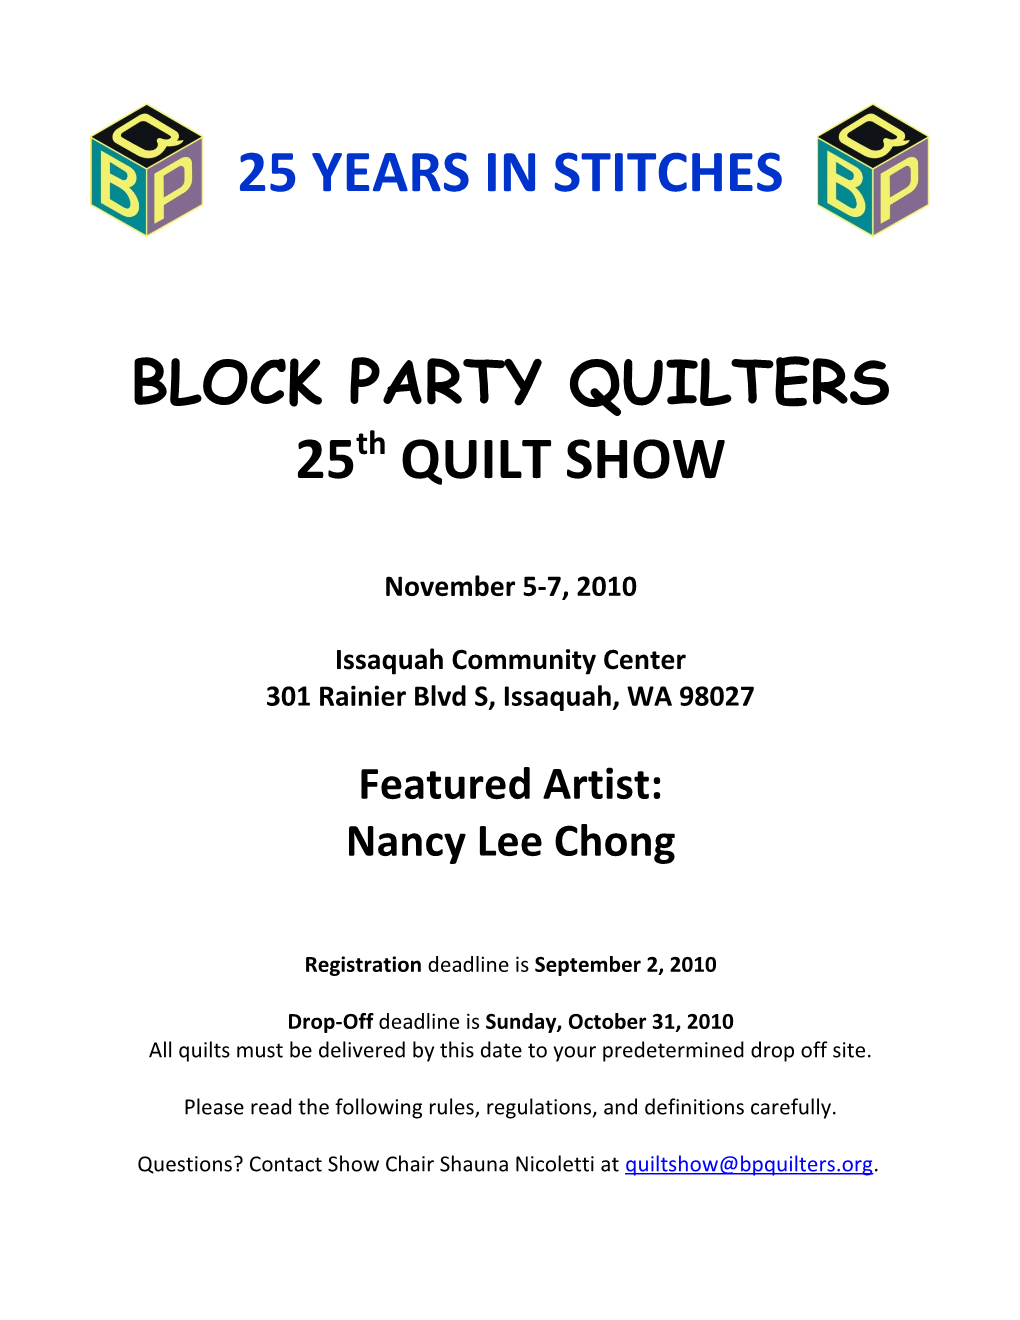 Block Party Quilters Club